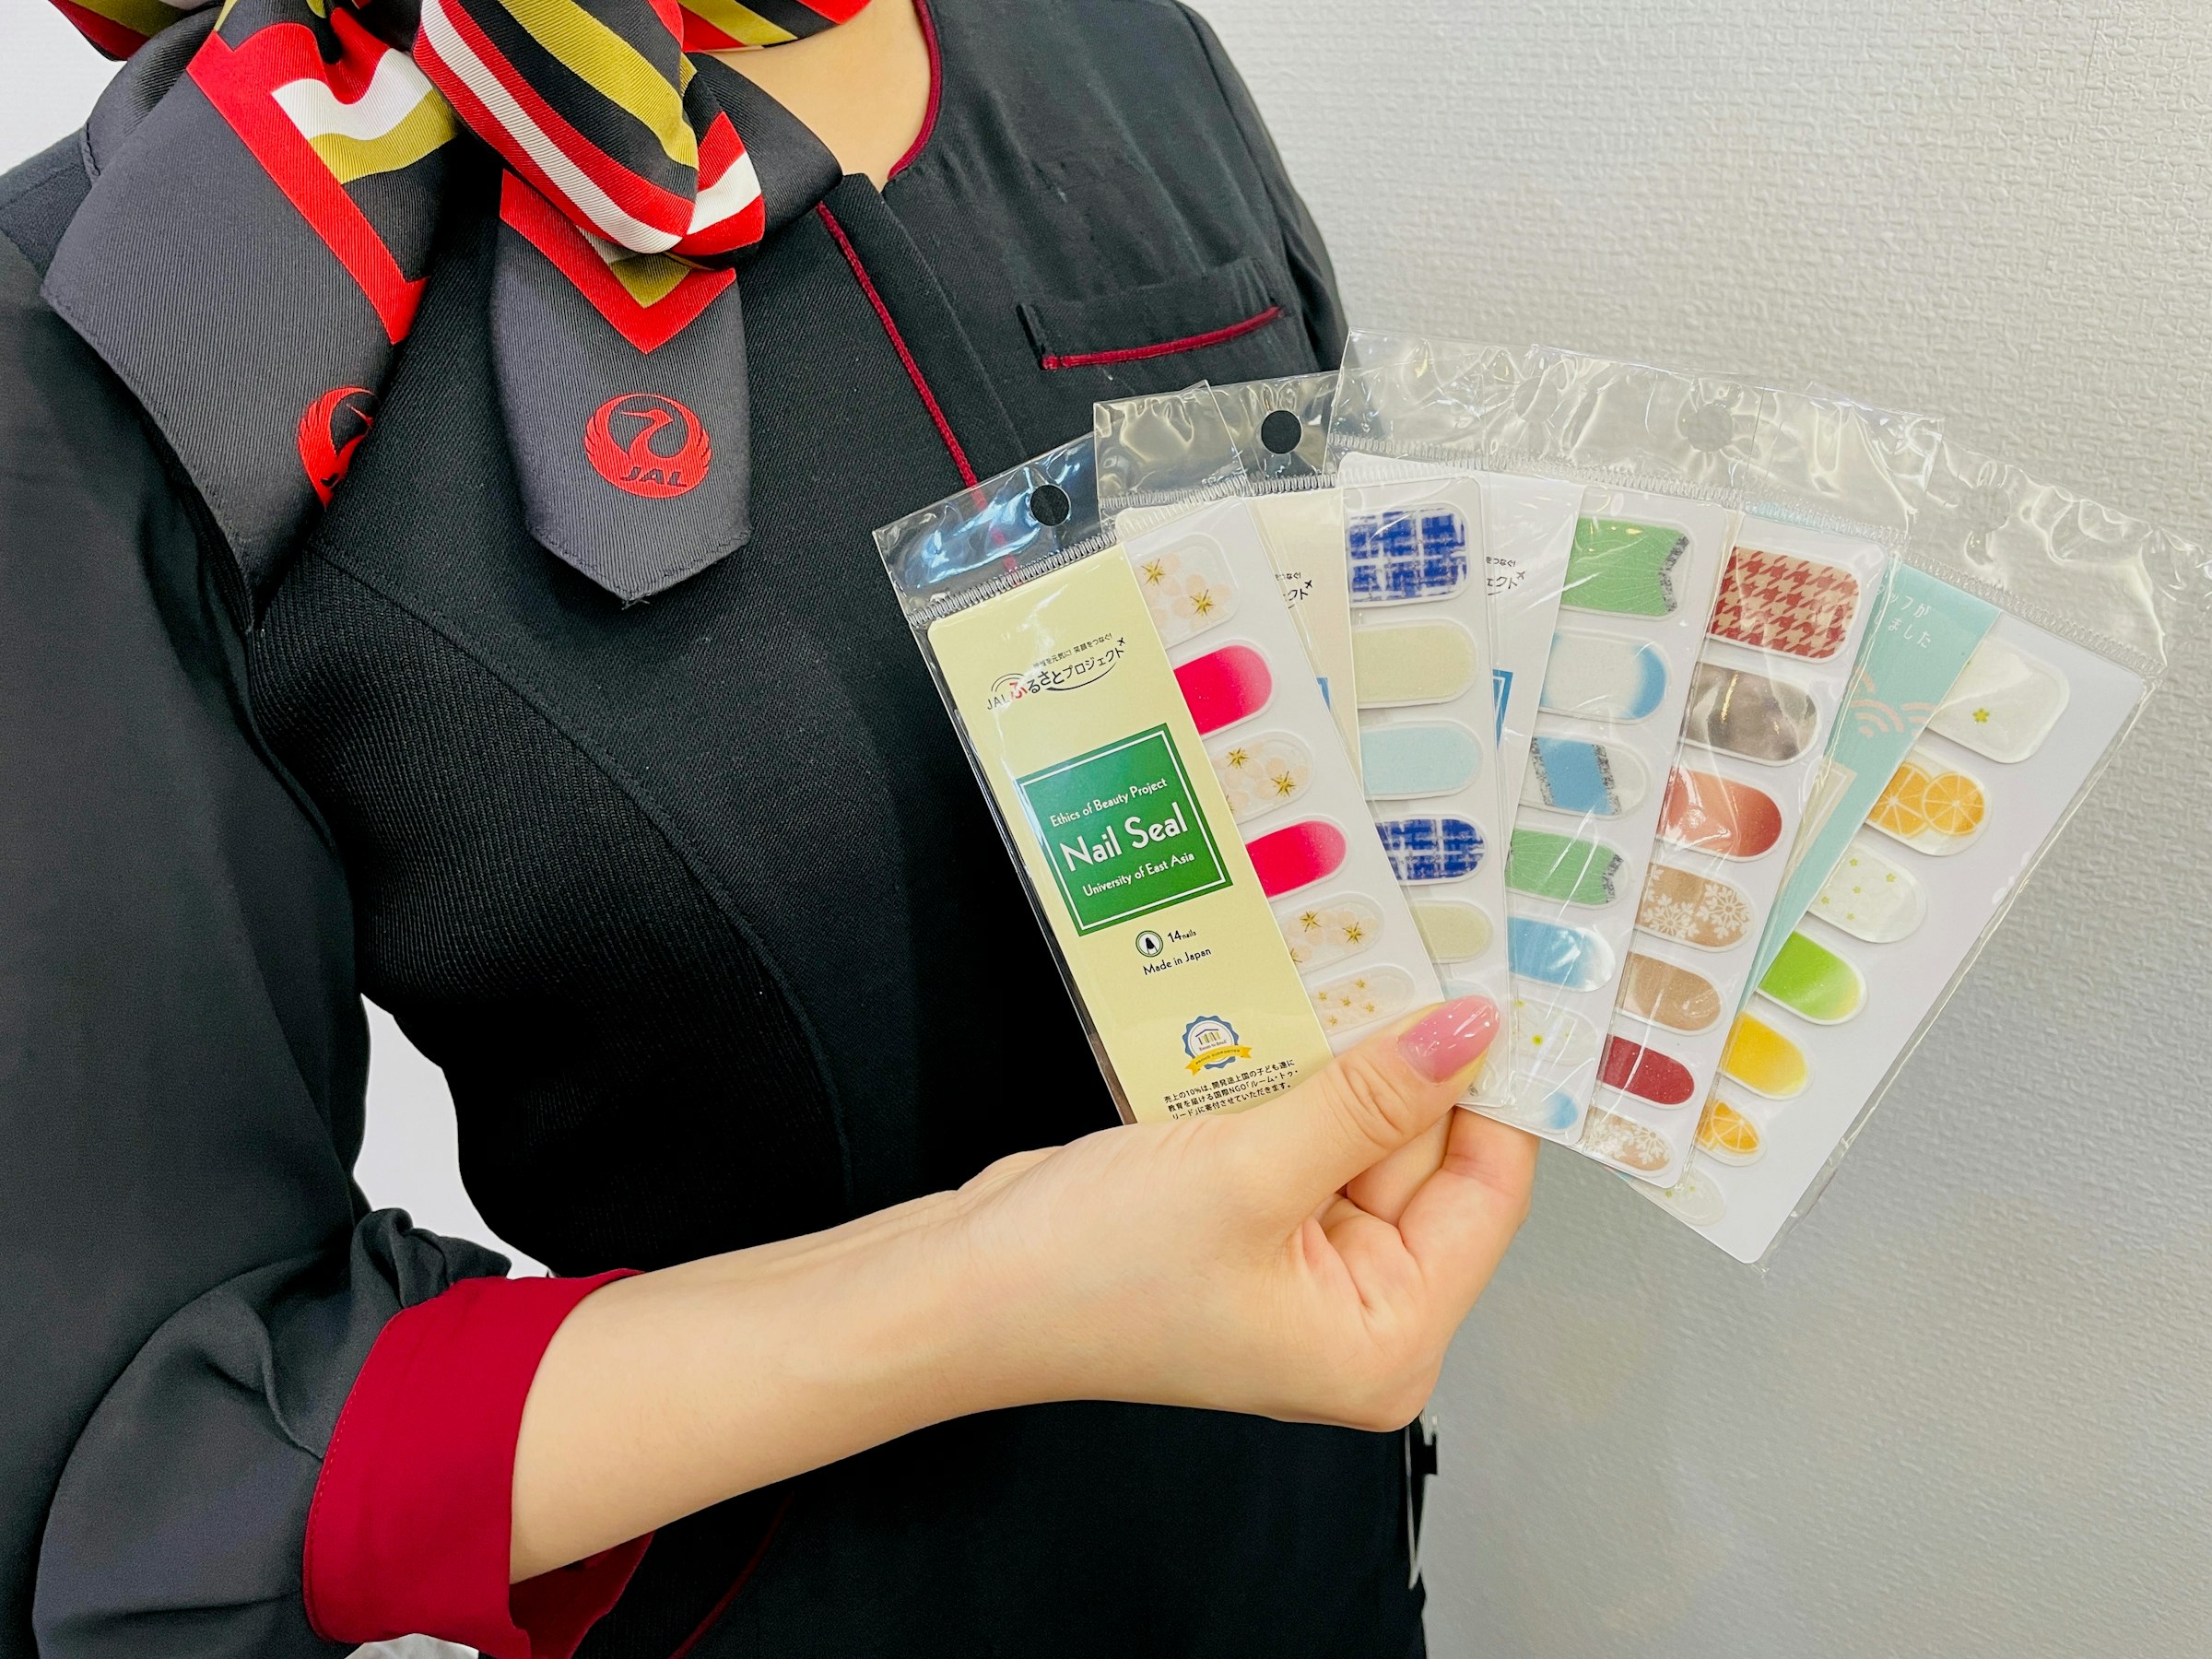 Using nail stress relief effects to develop tourist-themed nail stickers in collaboration between JAL and students